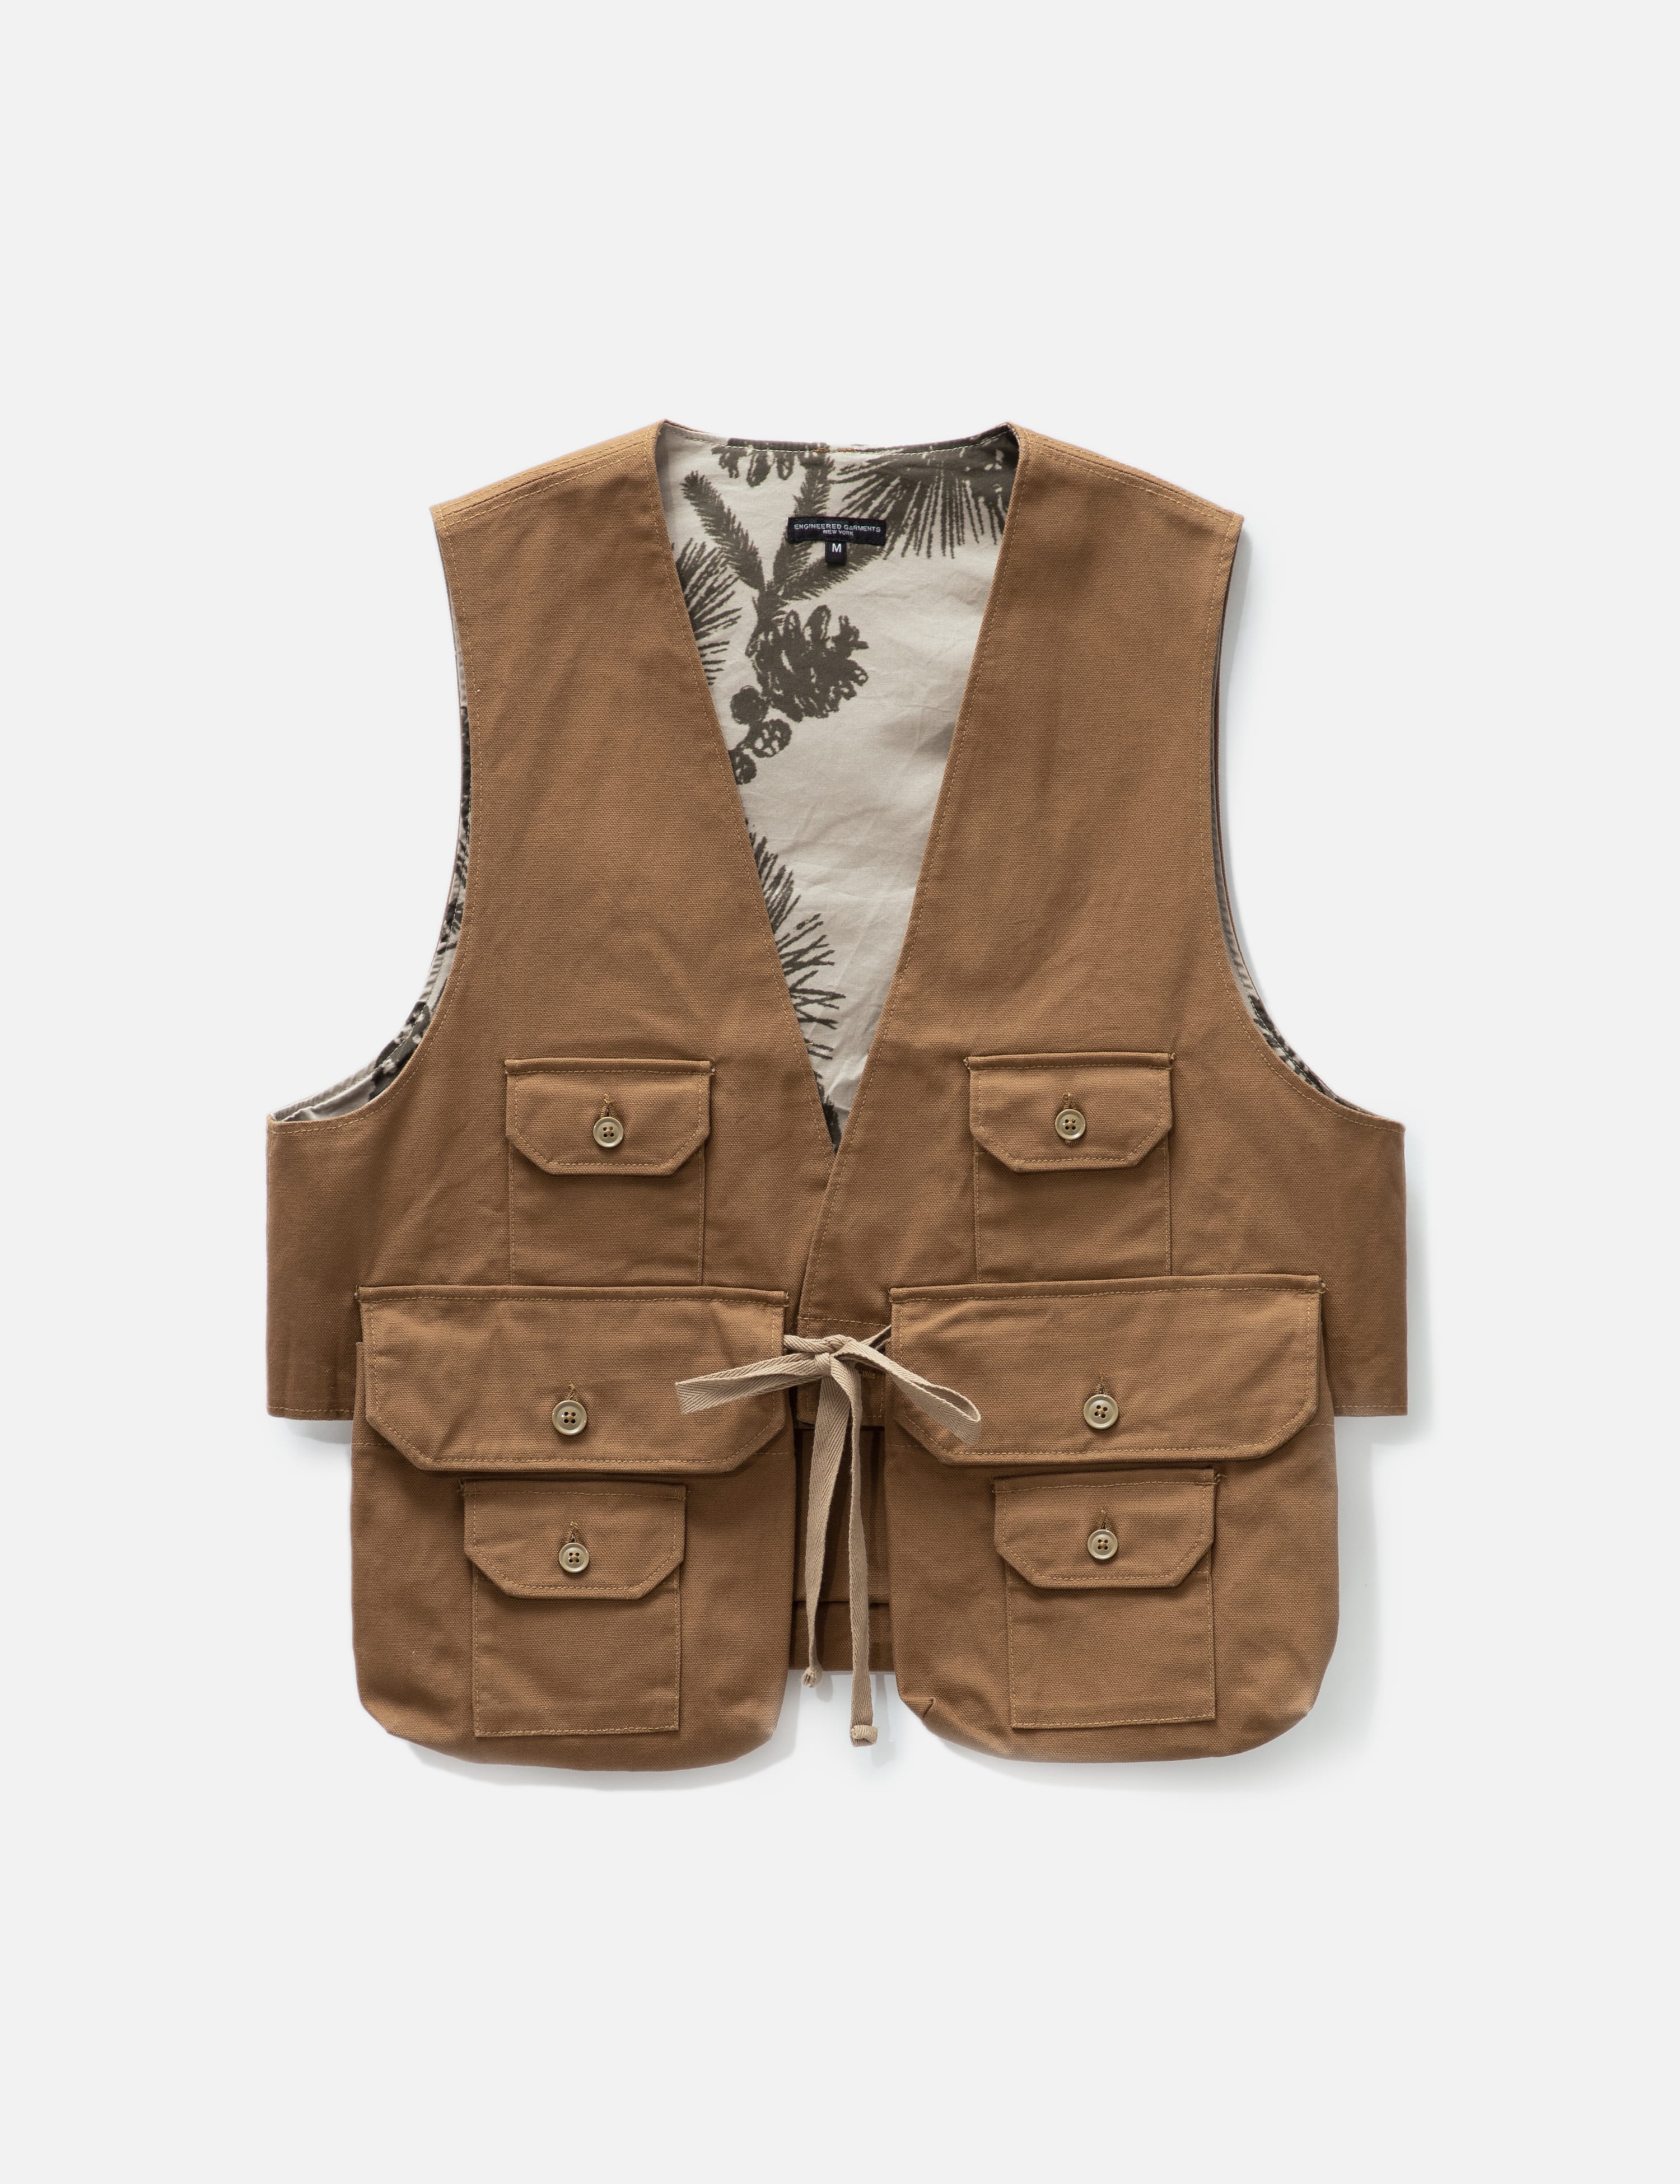 Engineered Garments - Fowl Vest | HBX - Globally Curated Fashion